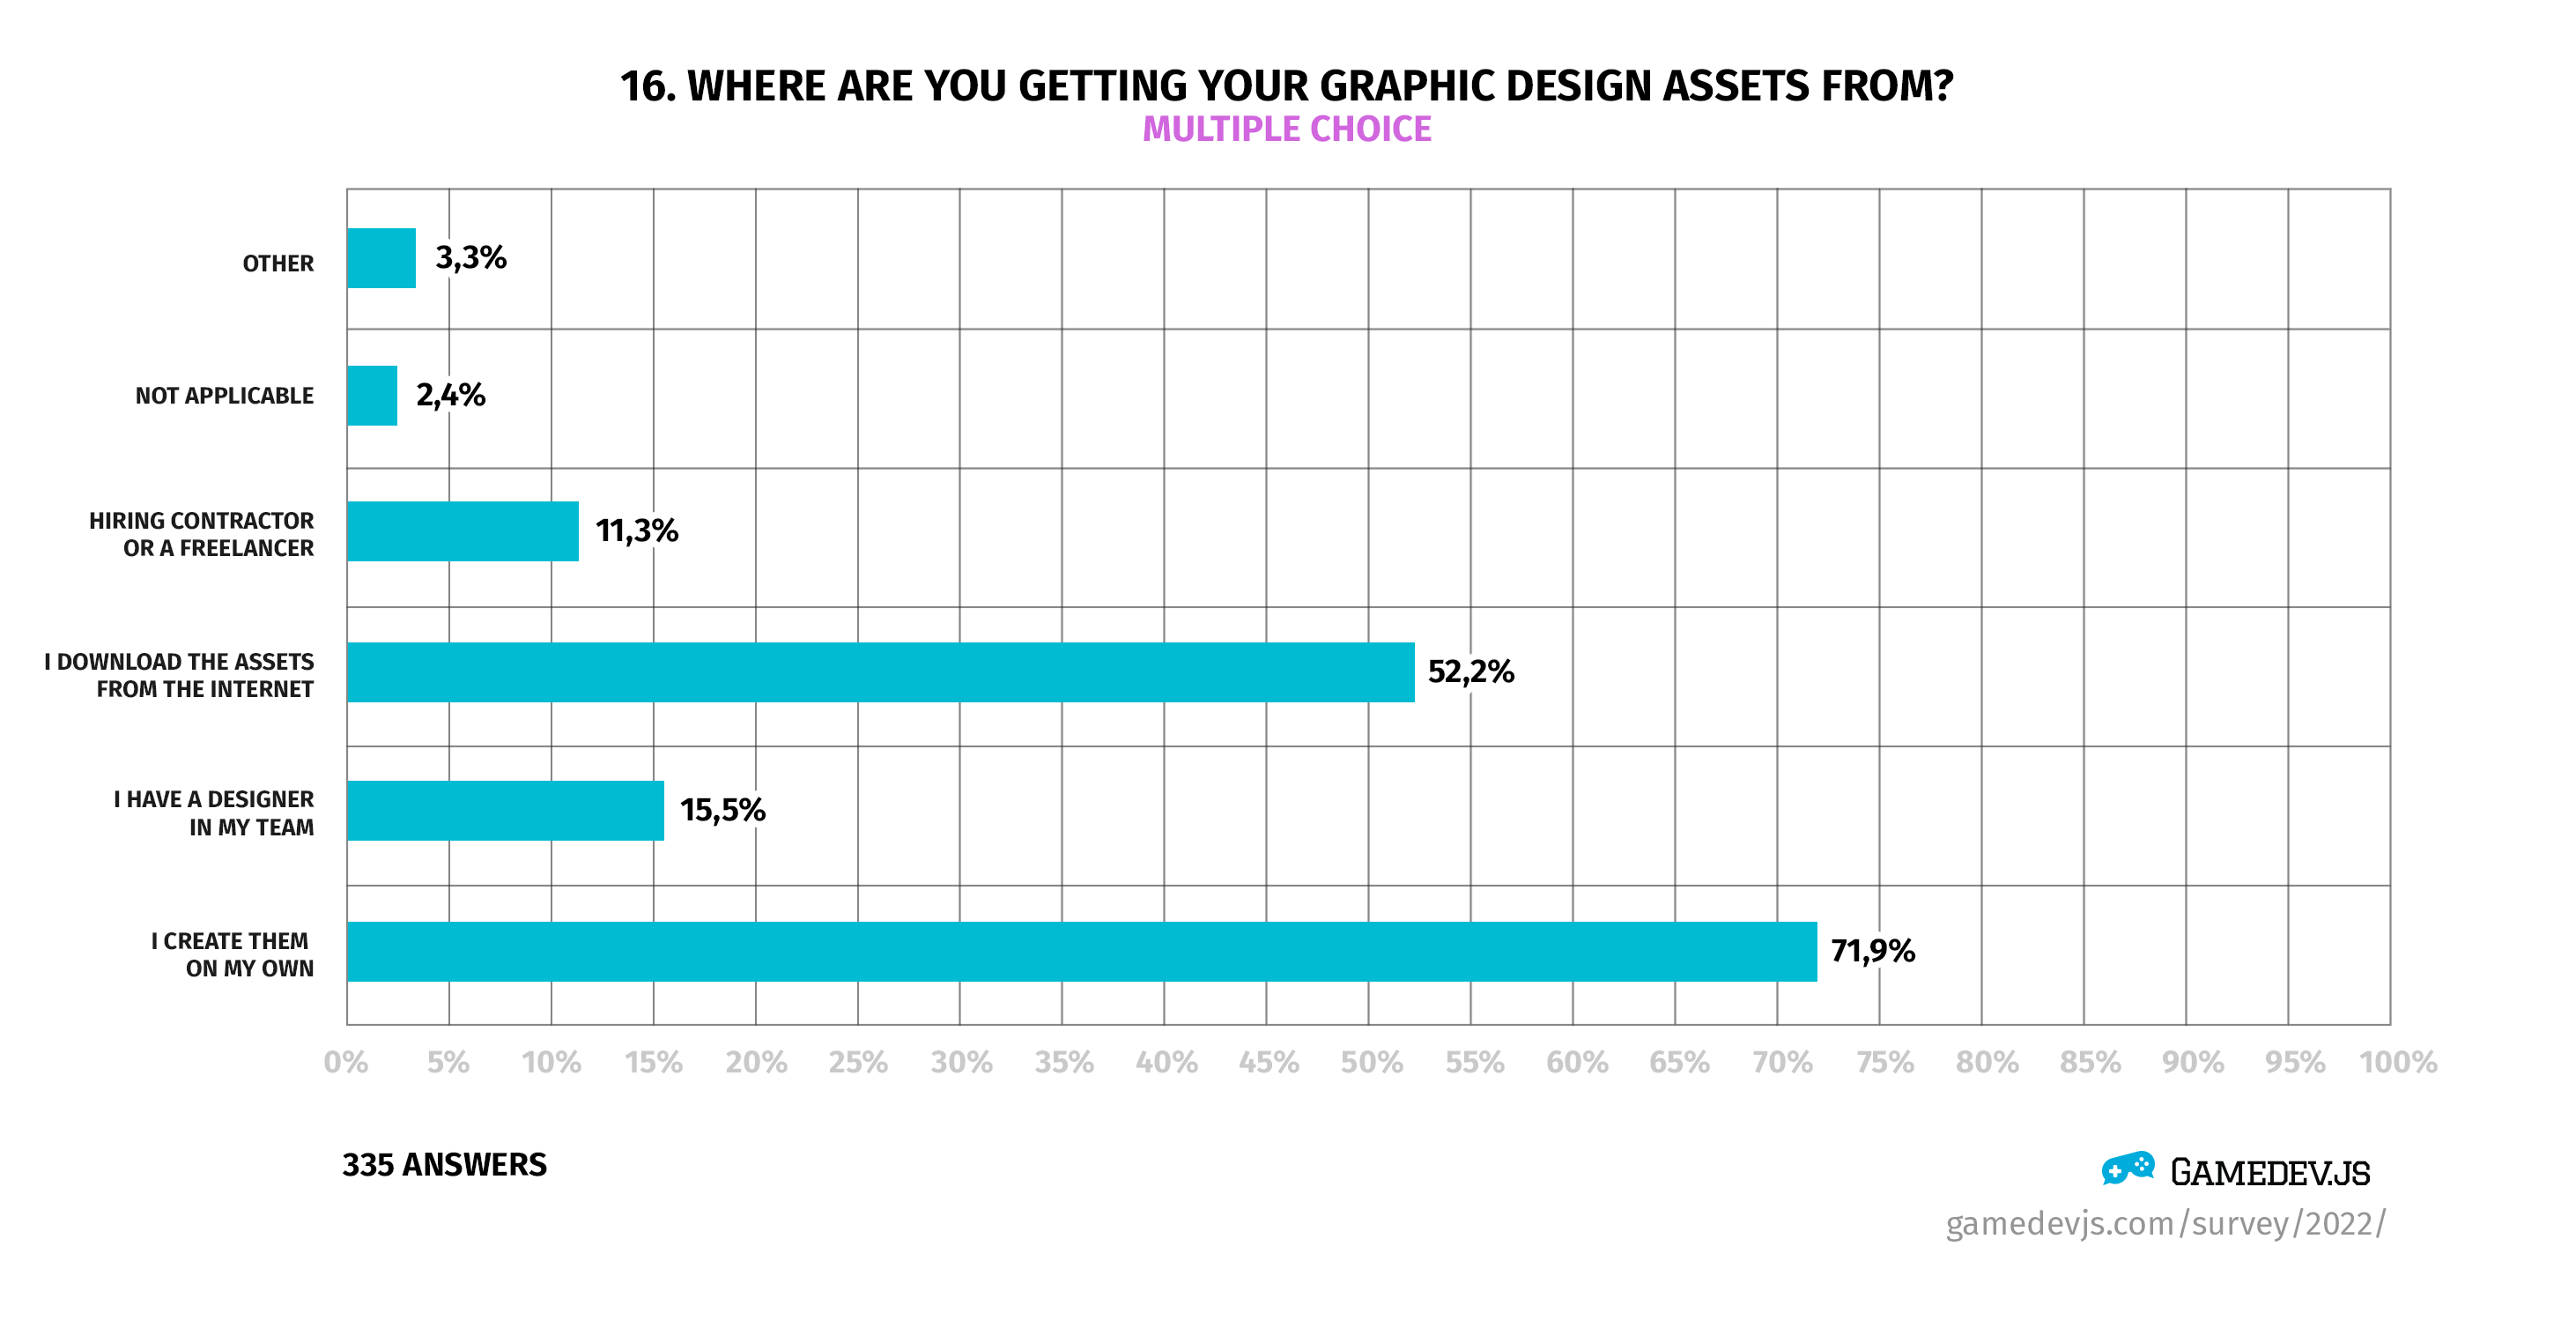 Gamedev.js Survey 2022 - Question #16: Where are you getting your graphic design assets from?